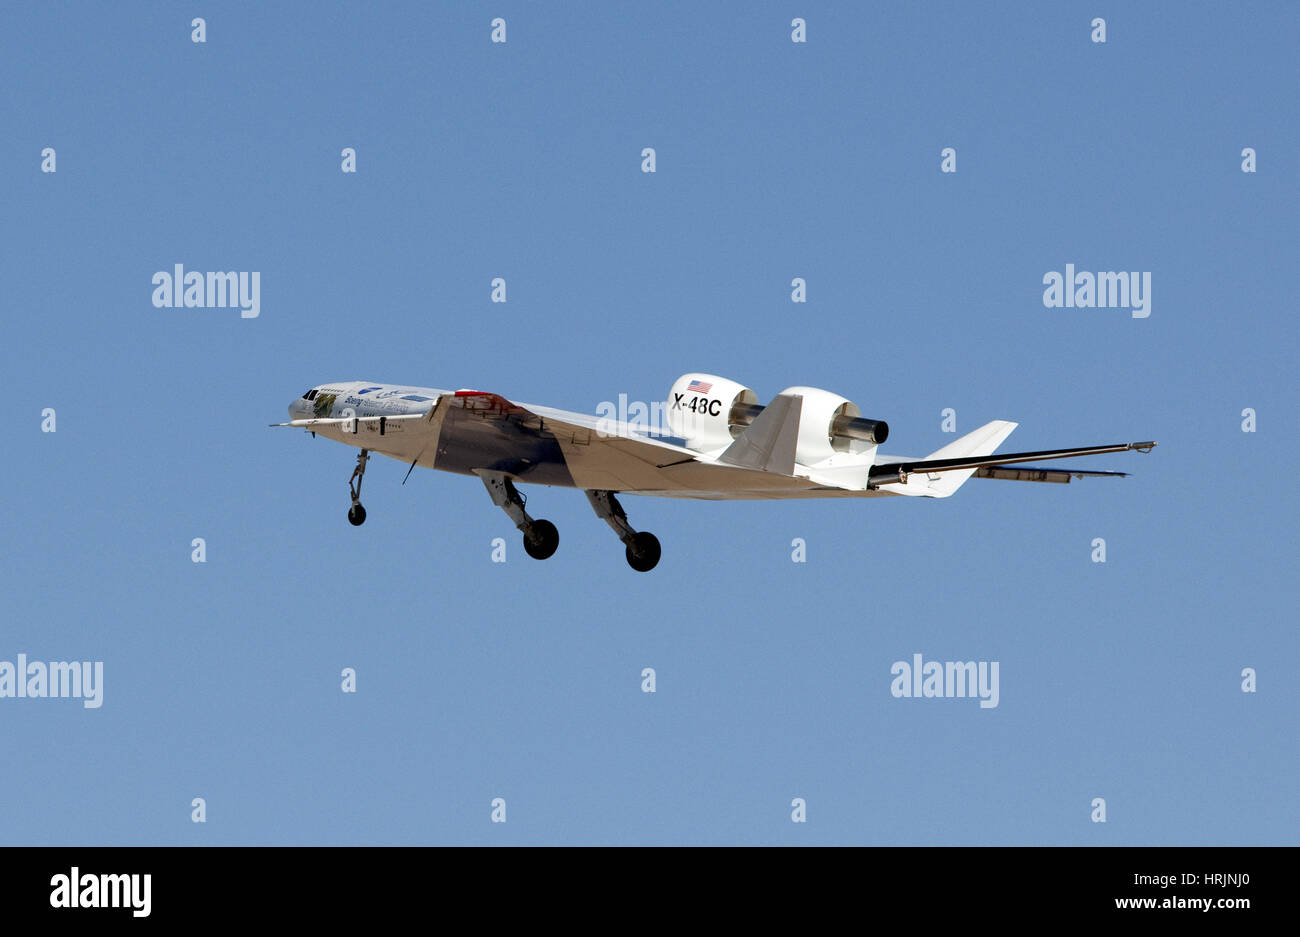 X-48C blended wing corpo aereo, 2012 Foto Stock